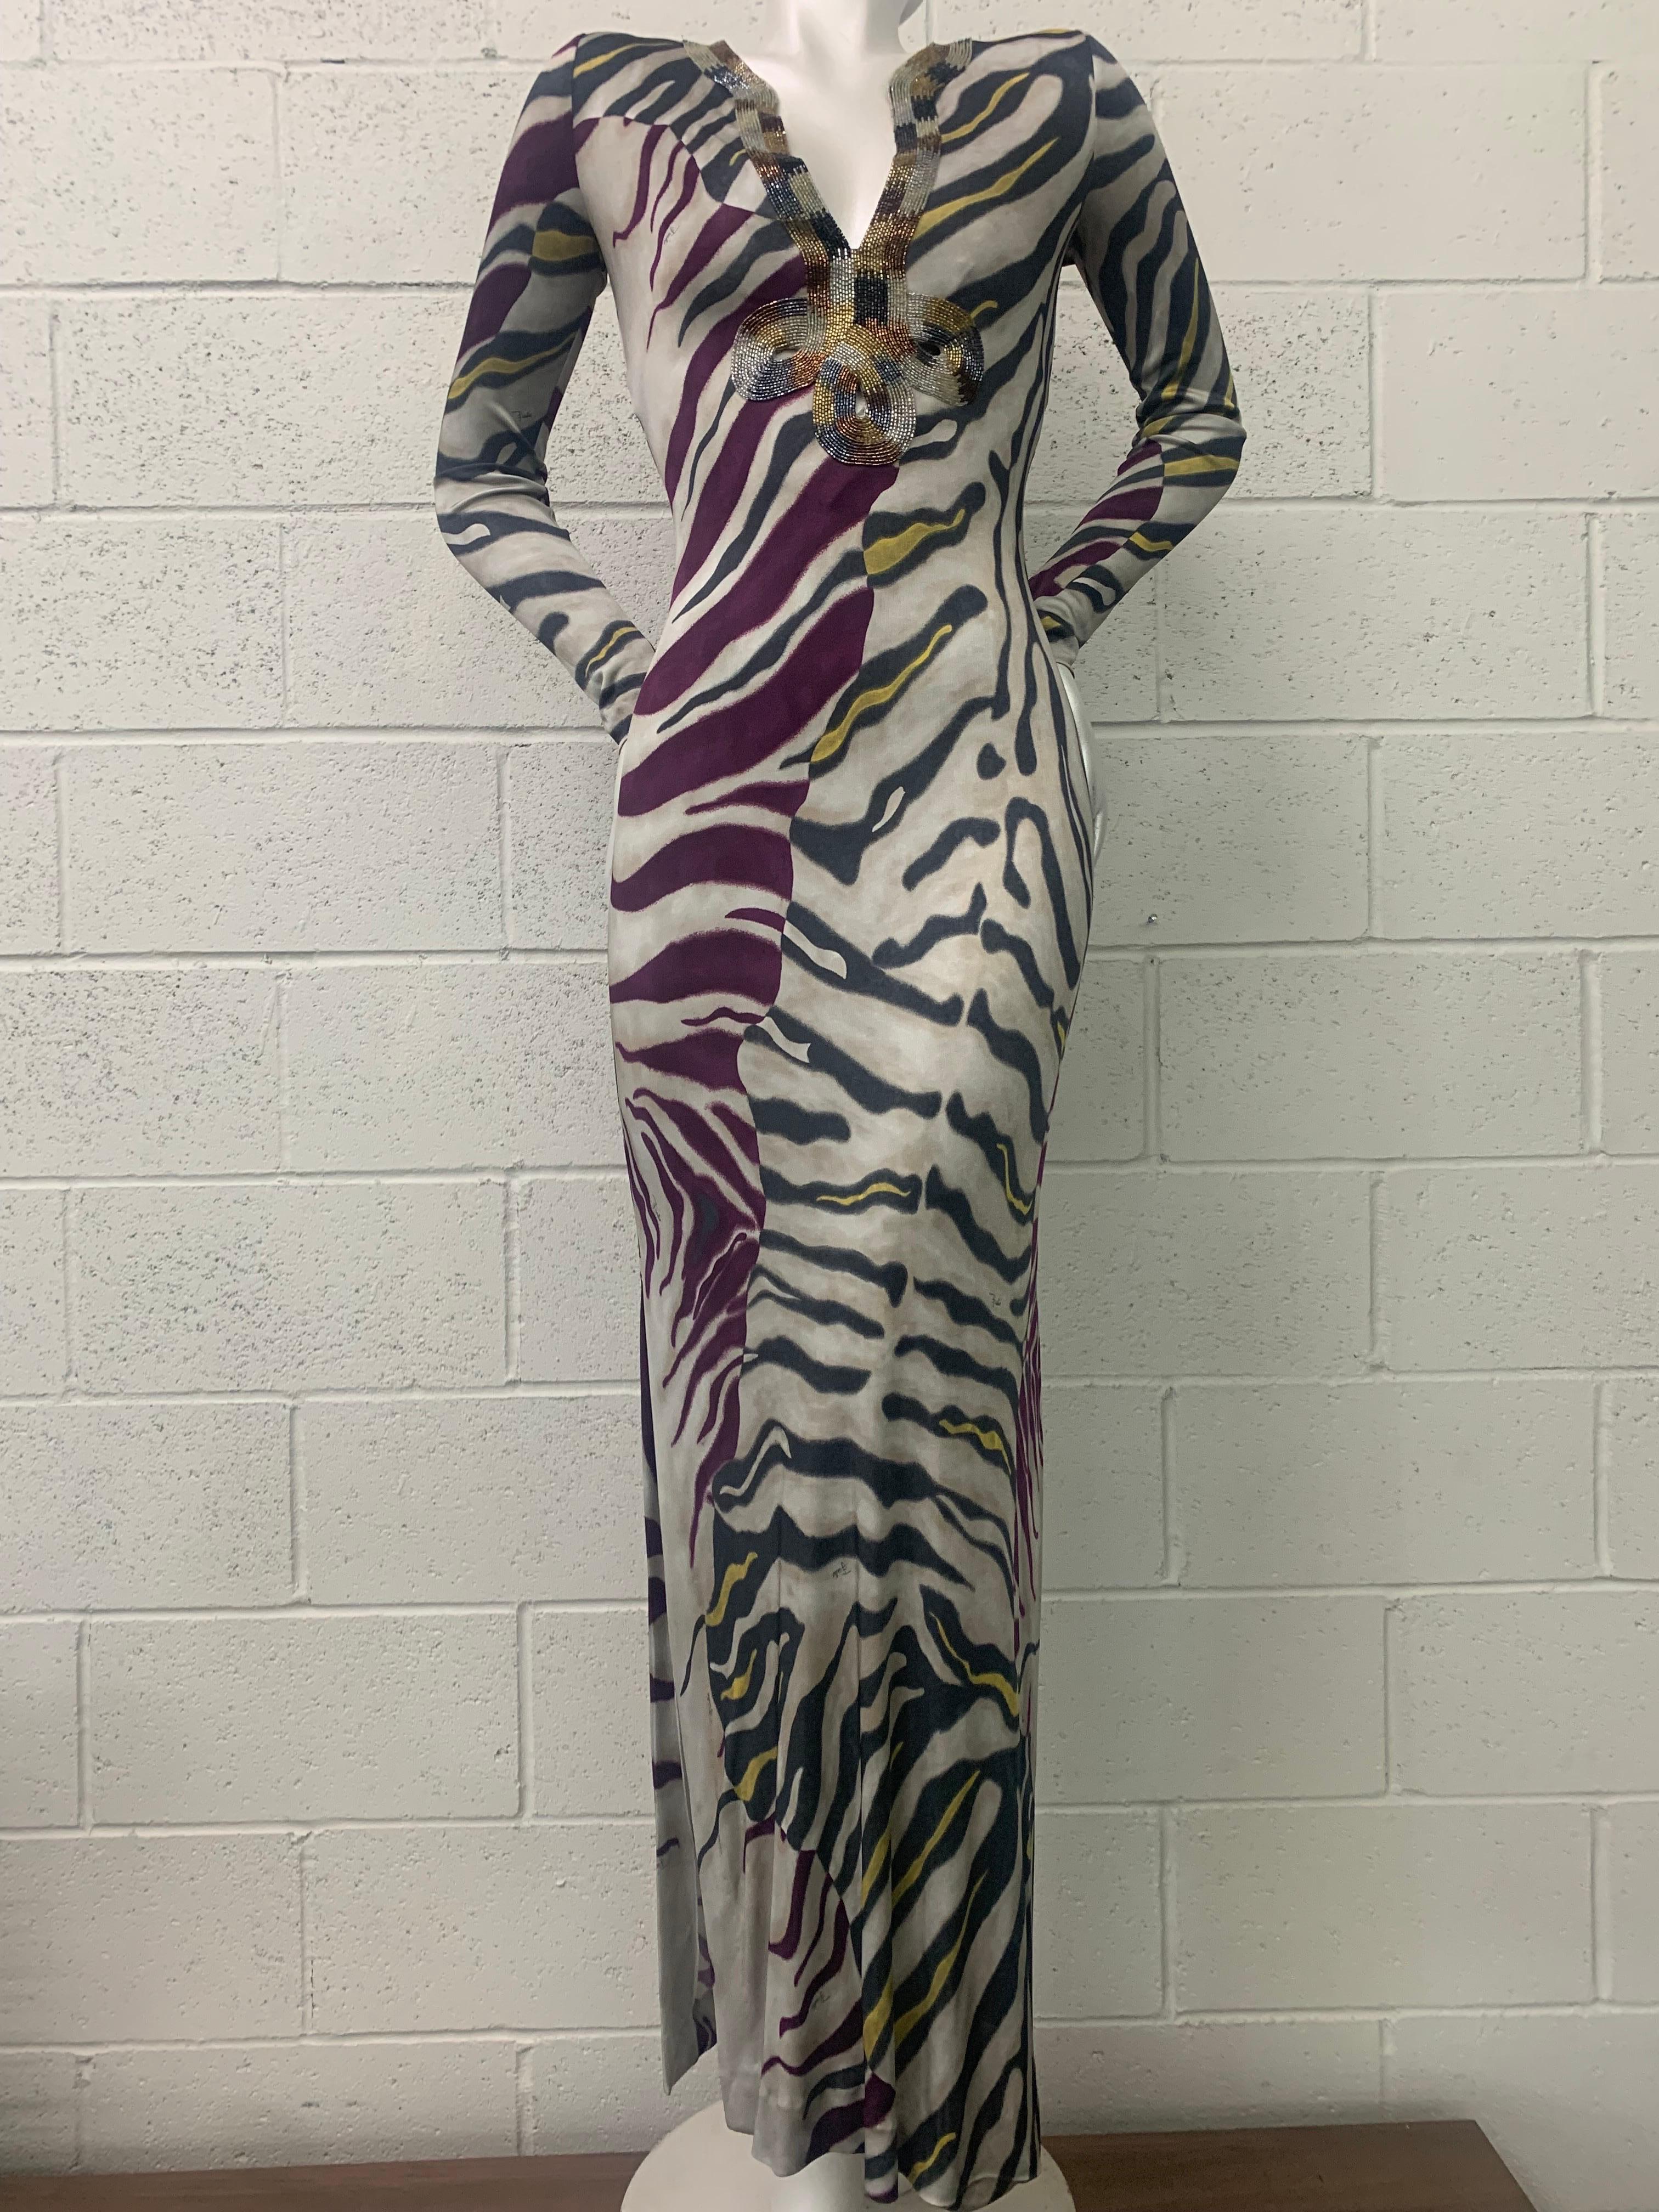 Emilio Pucci Stylized Zebra-Print Body-Conscious Beaded Maxi Dress in Rayon Knit For Sale 2